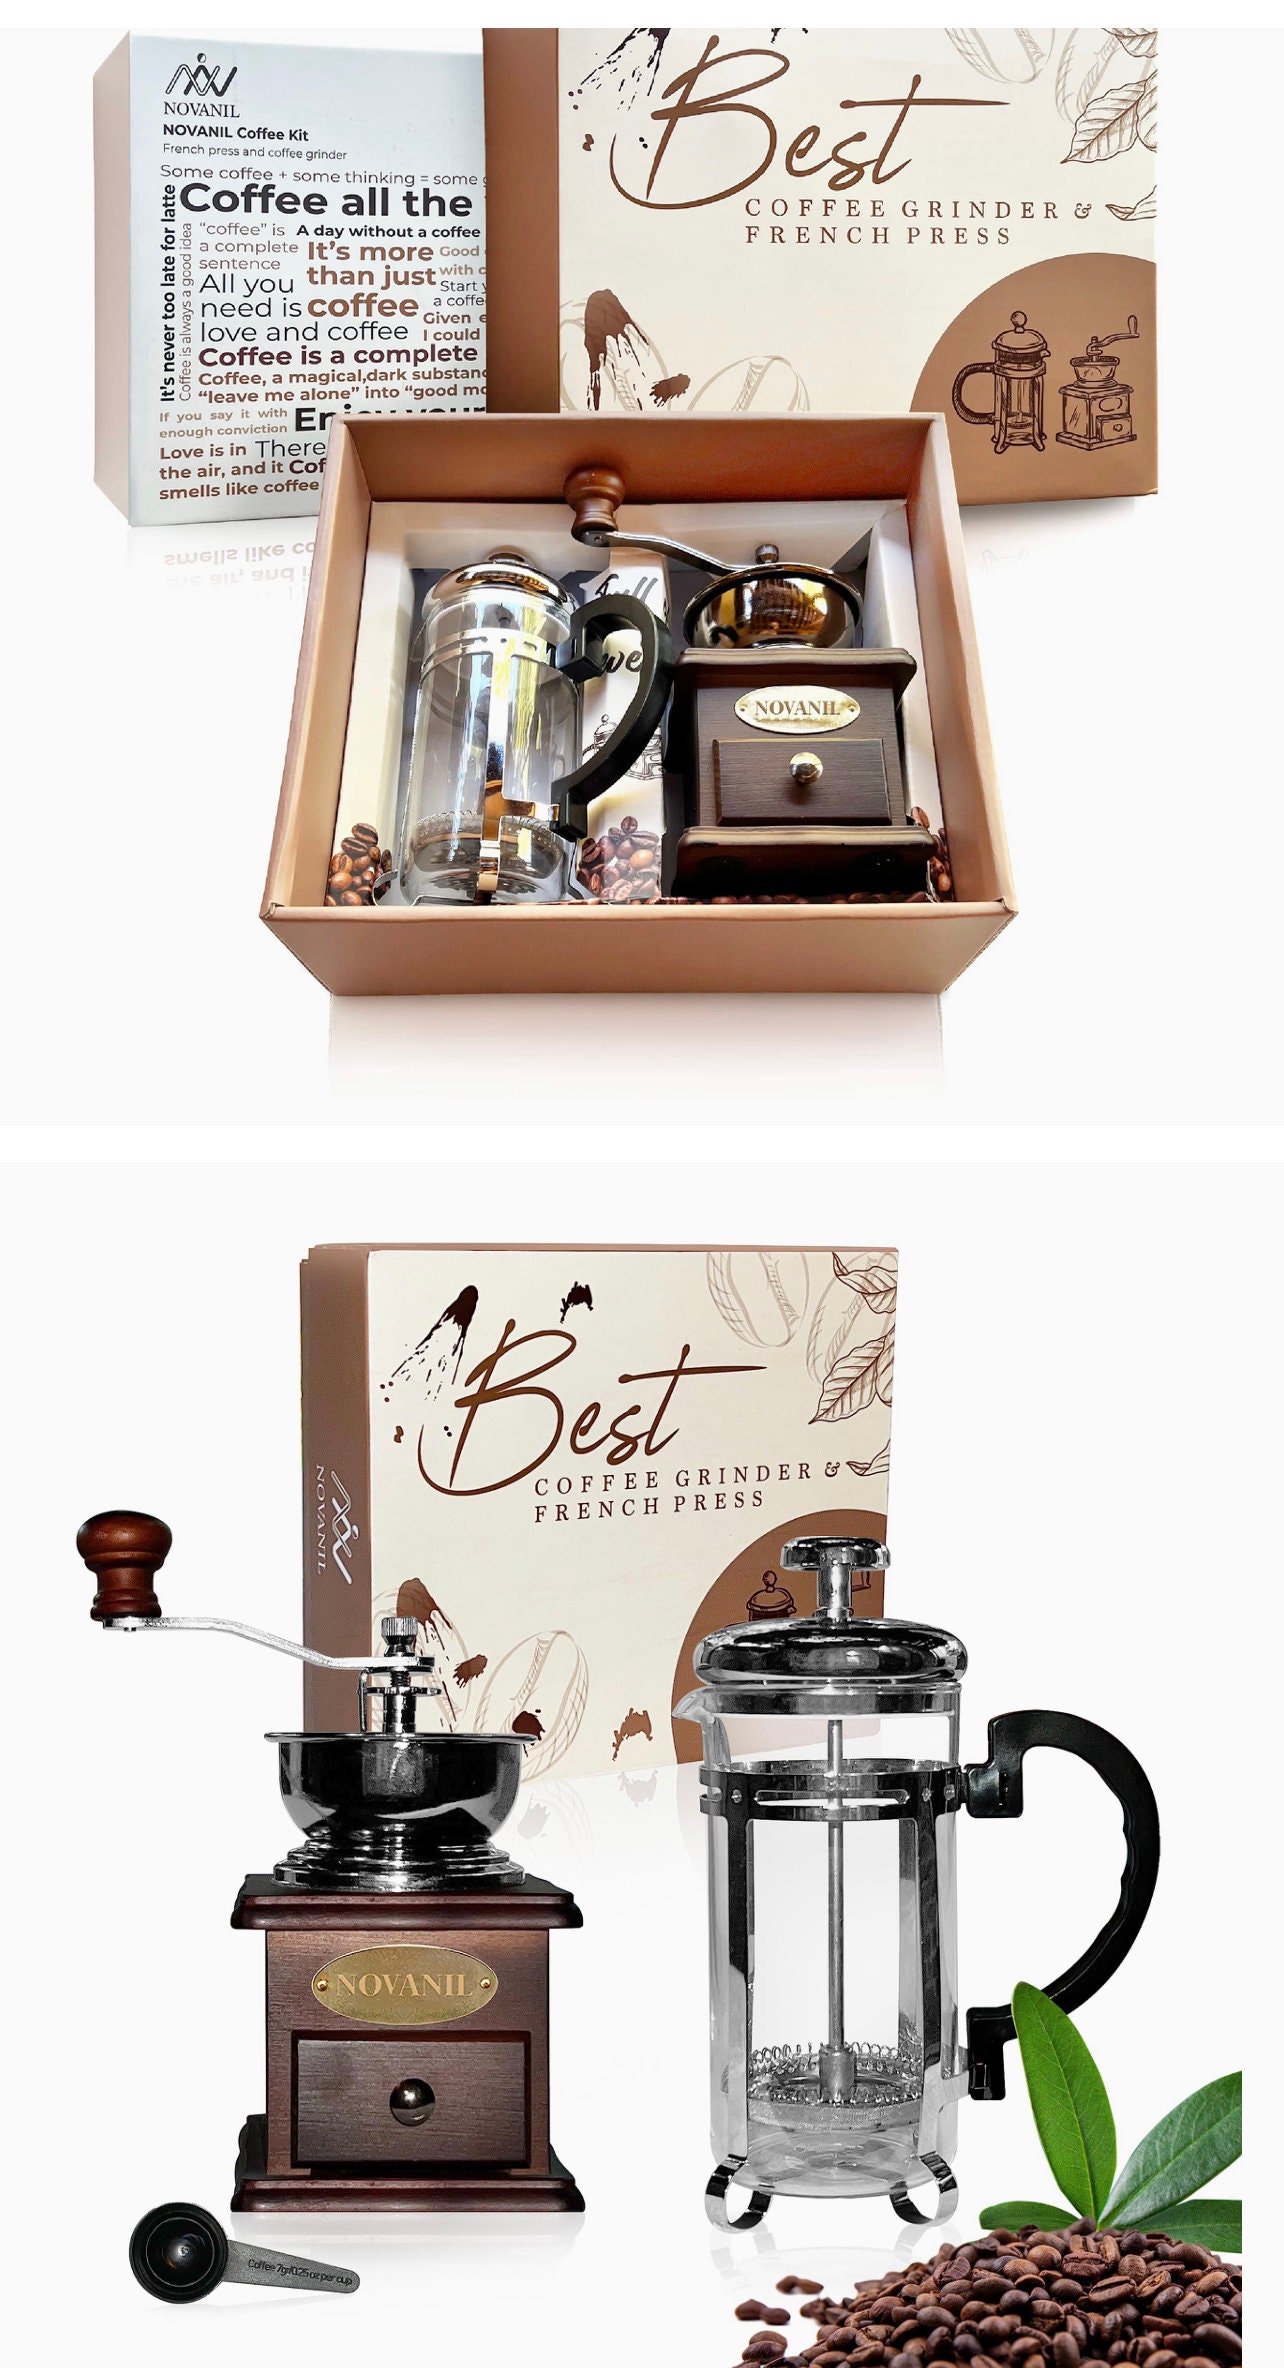 NOVANIL FRENCH COFFEE KIT, FRENCH PRESS & COFFEE GRINDER, COFFEE GIFT BOX,  COFFEE SET, ANTIQUE STYLE COFFEE KIT, WOODEN MANUAL COFFEE GRINDER